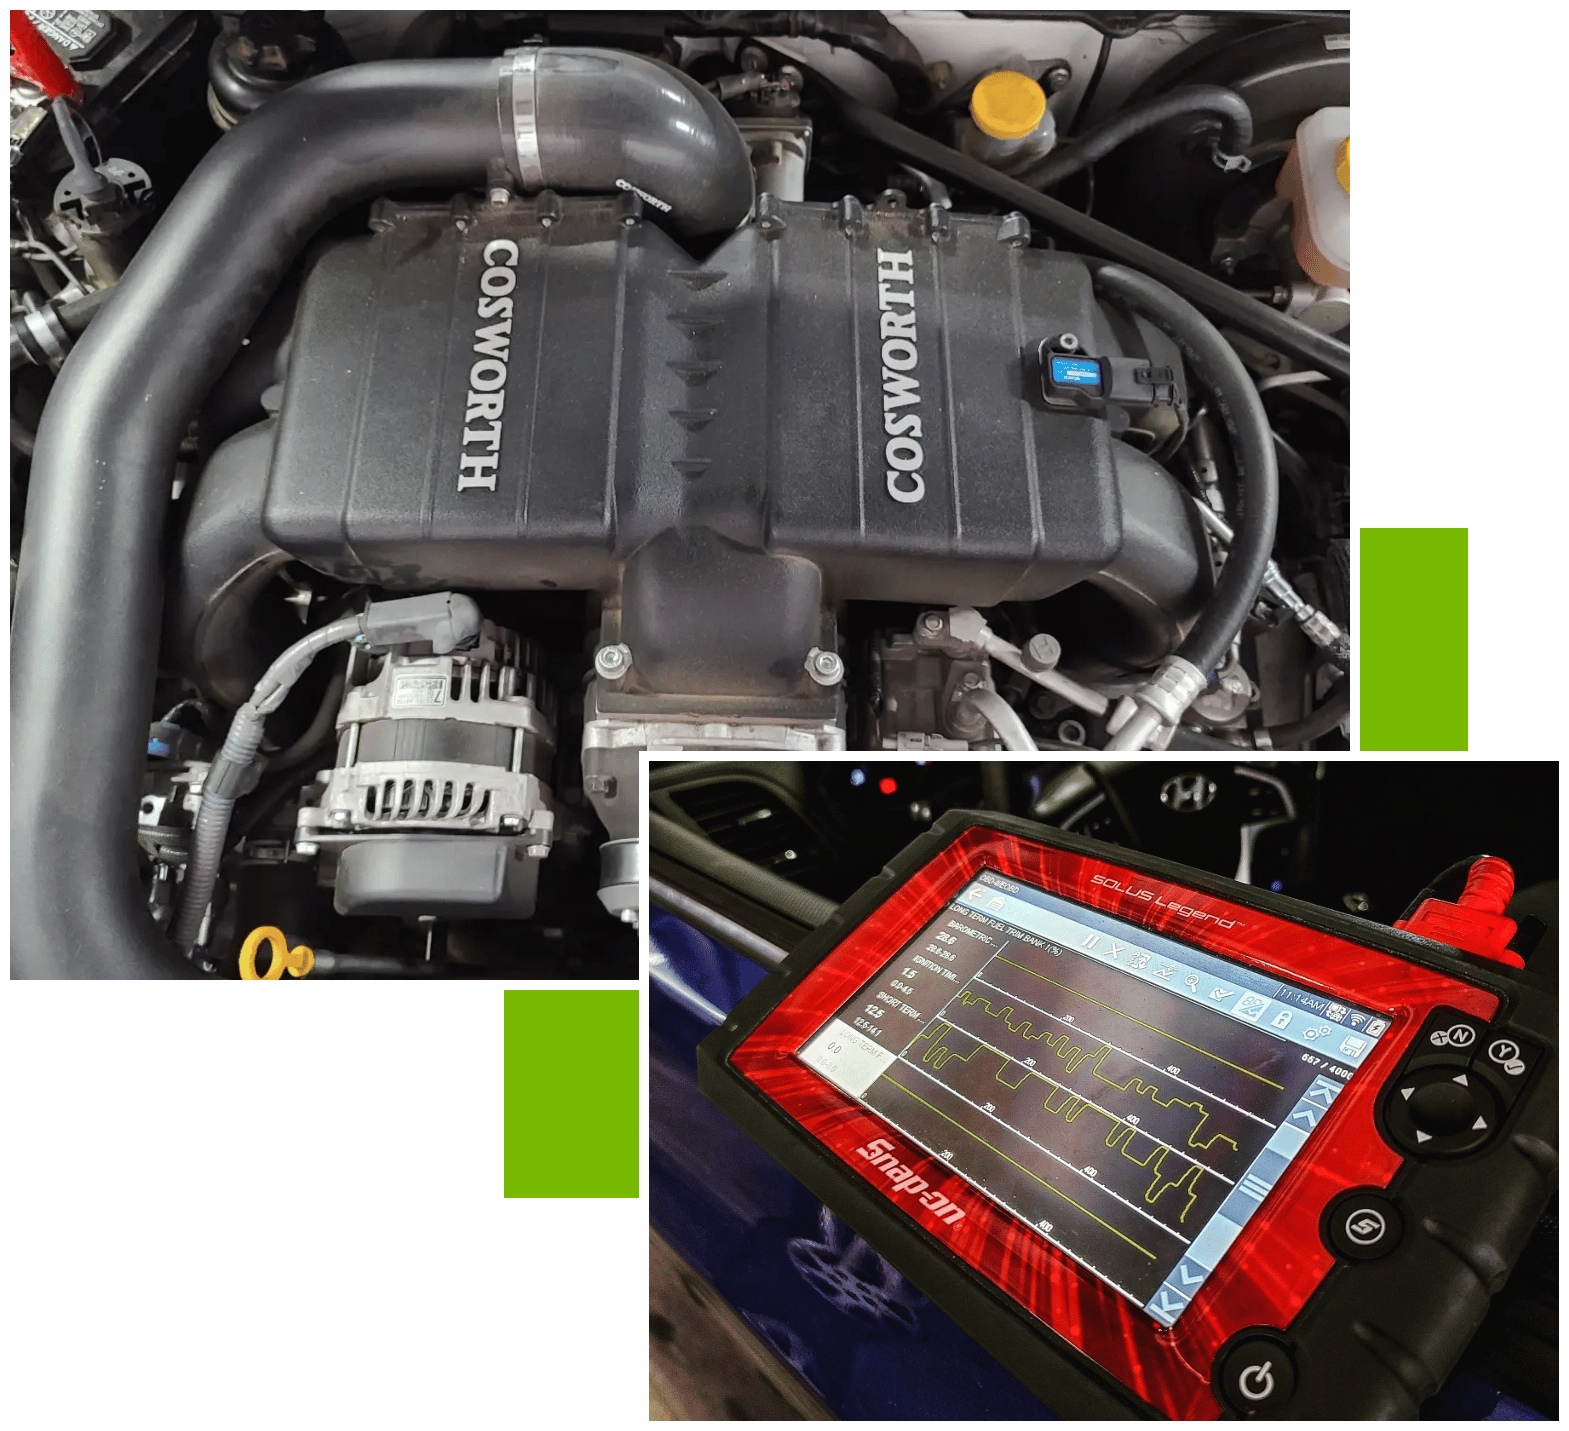 On top, image of a Cosworth engine. At bottom right, image of a scanner for vehicle diagnostics. Concept image of auto repair, engine repair, & diagnostic servcies at Brittni's Automotive.